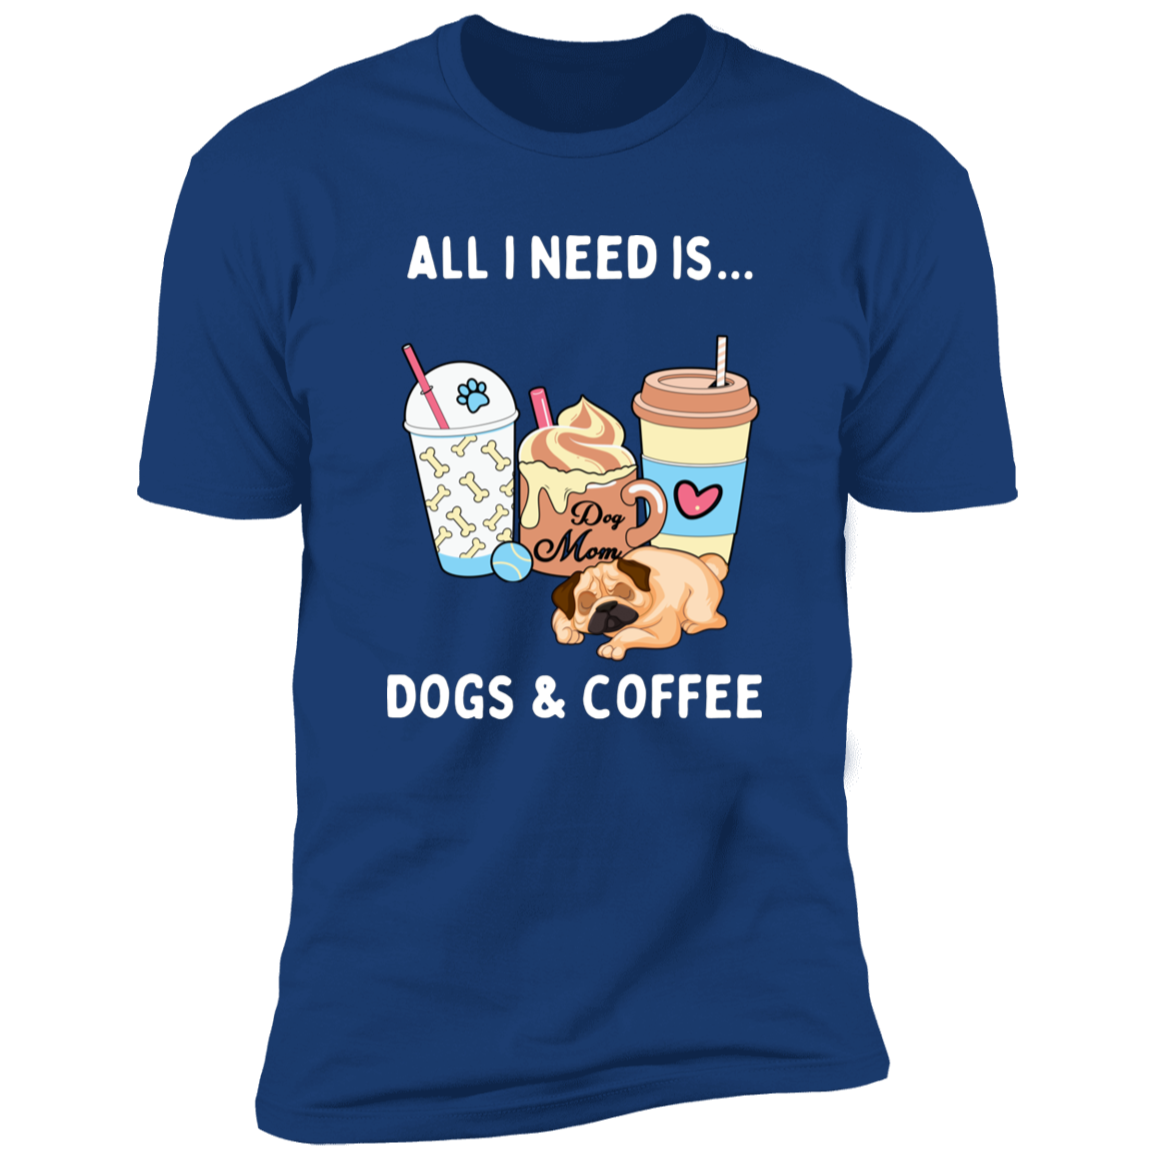 All I Need is Dogs and Coffee, Dog shirt for humas, in royal blue